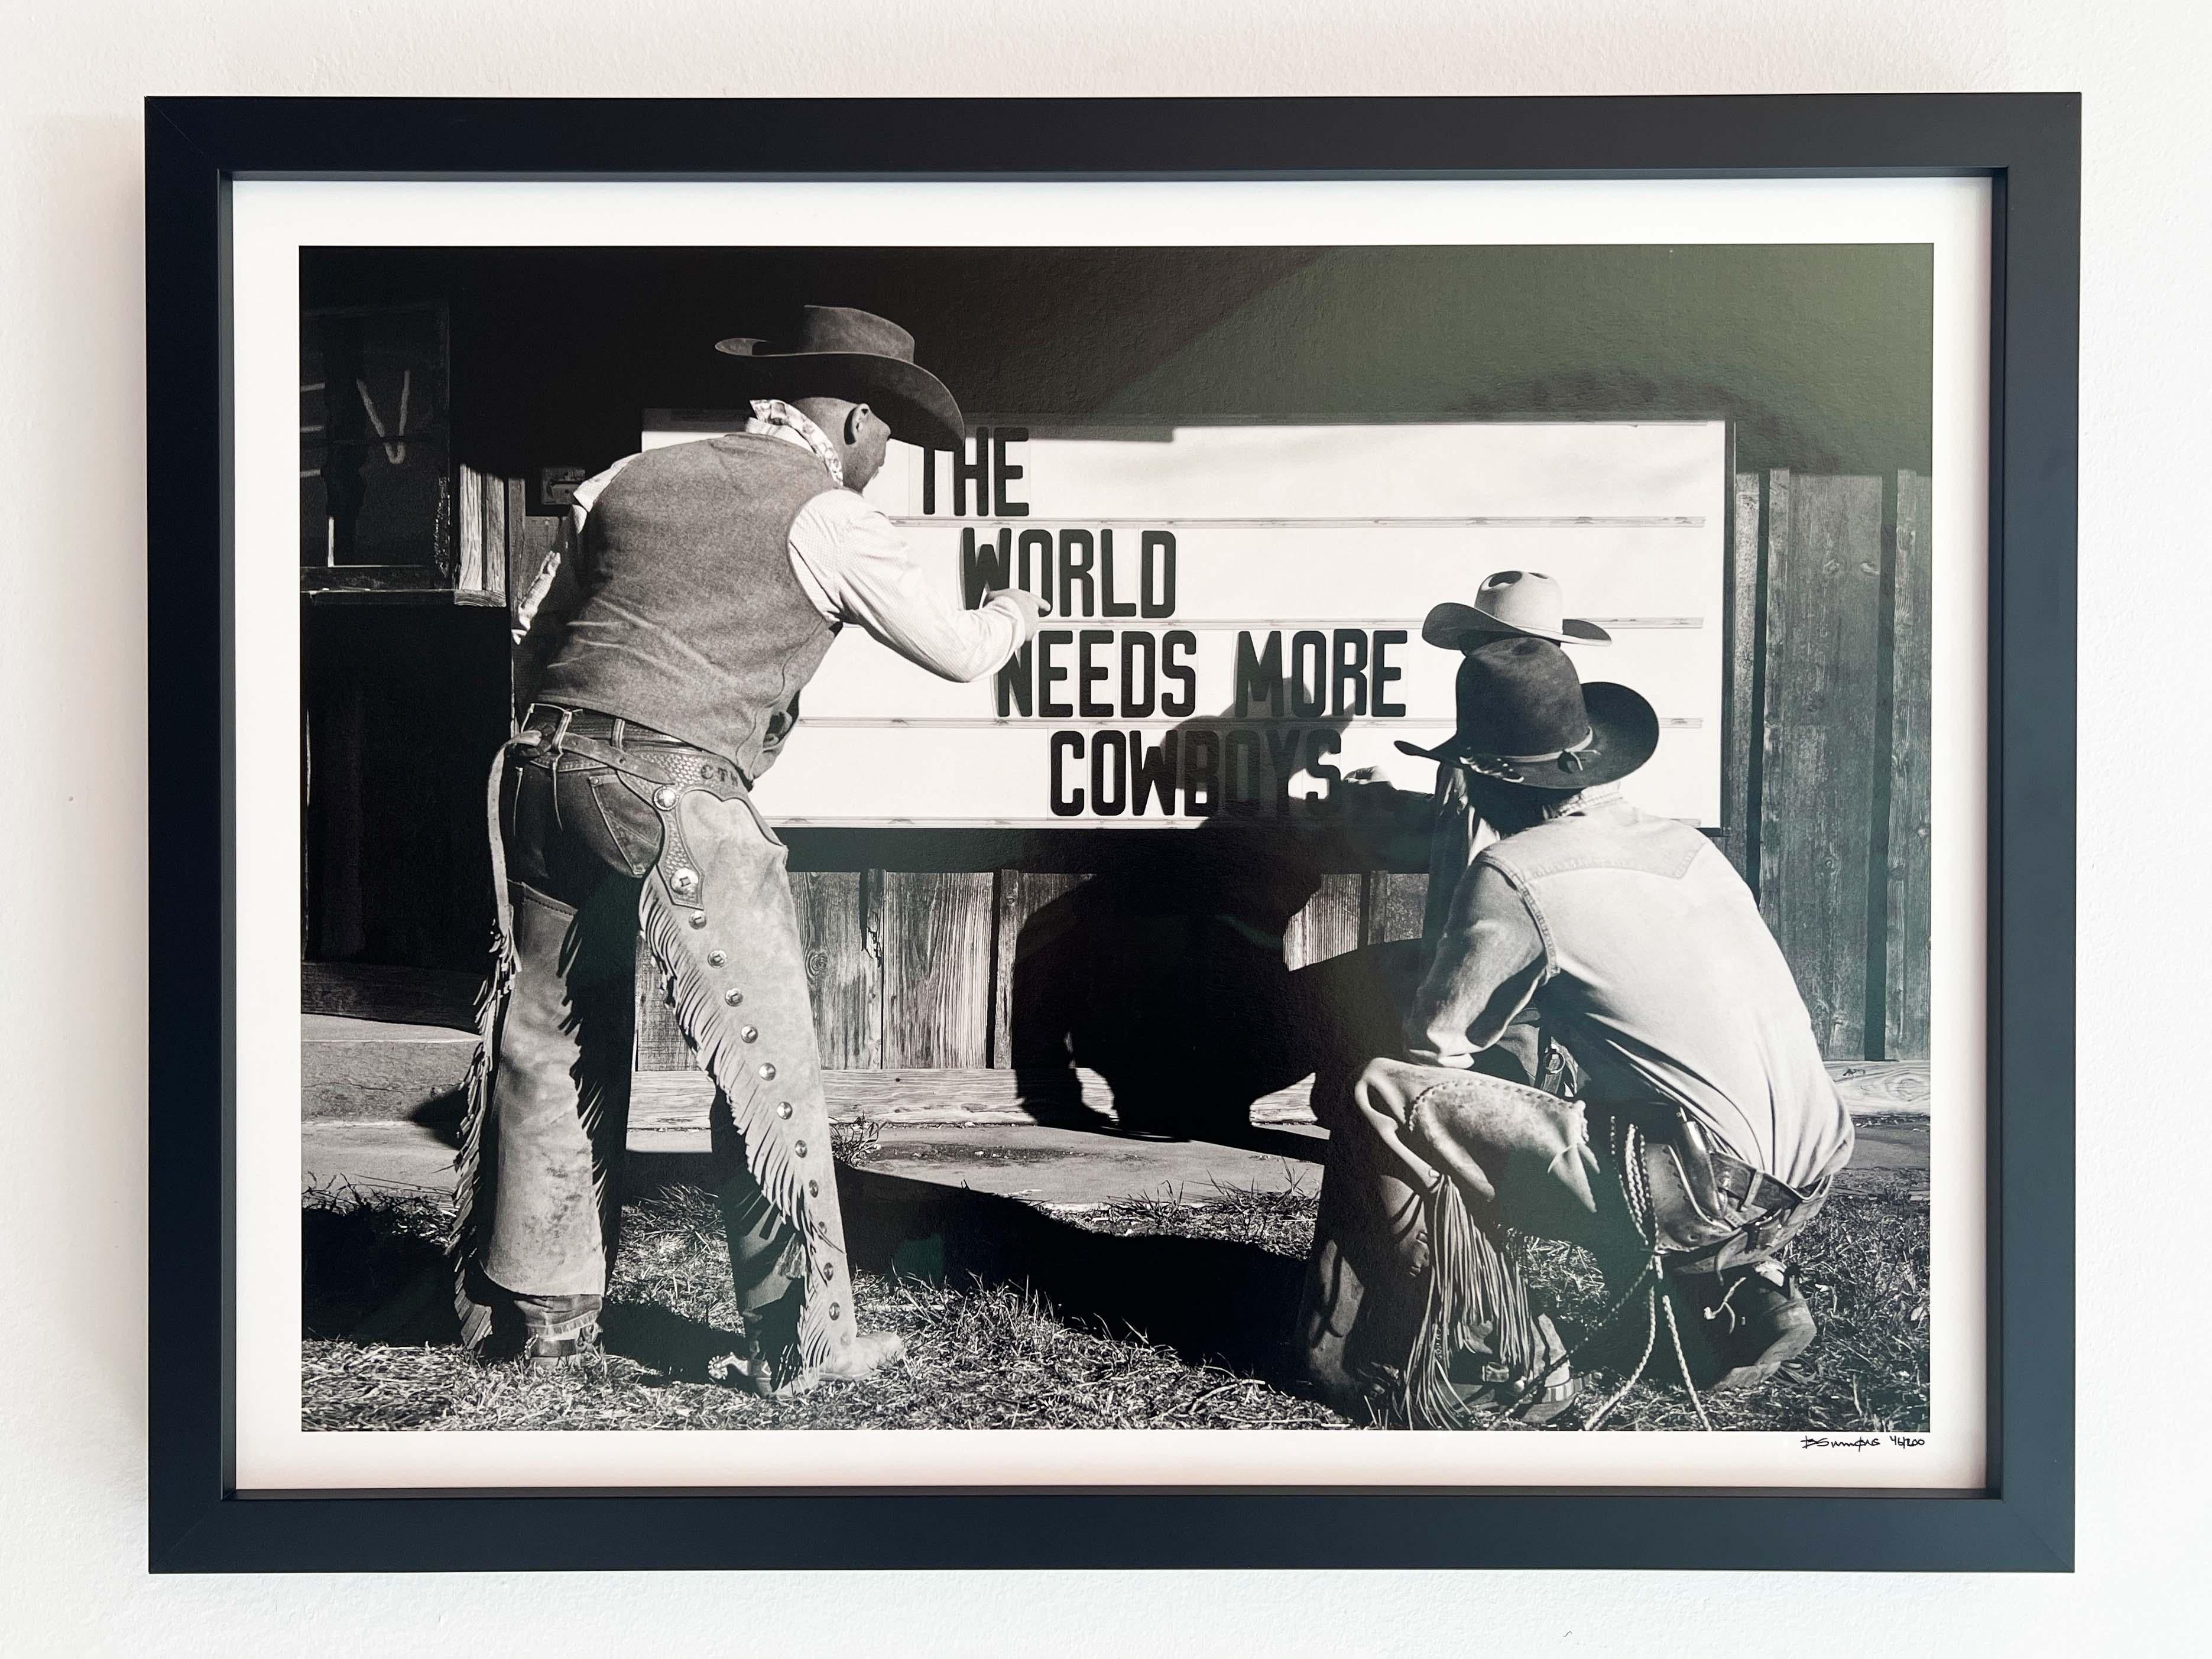 The World Needs More Cowboys, Special Edition - Contemporary Photograph by Beau Simmons